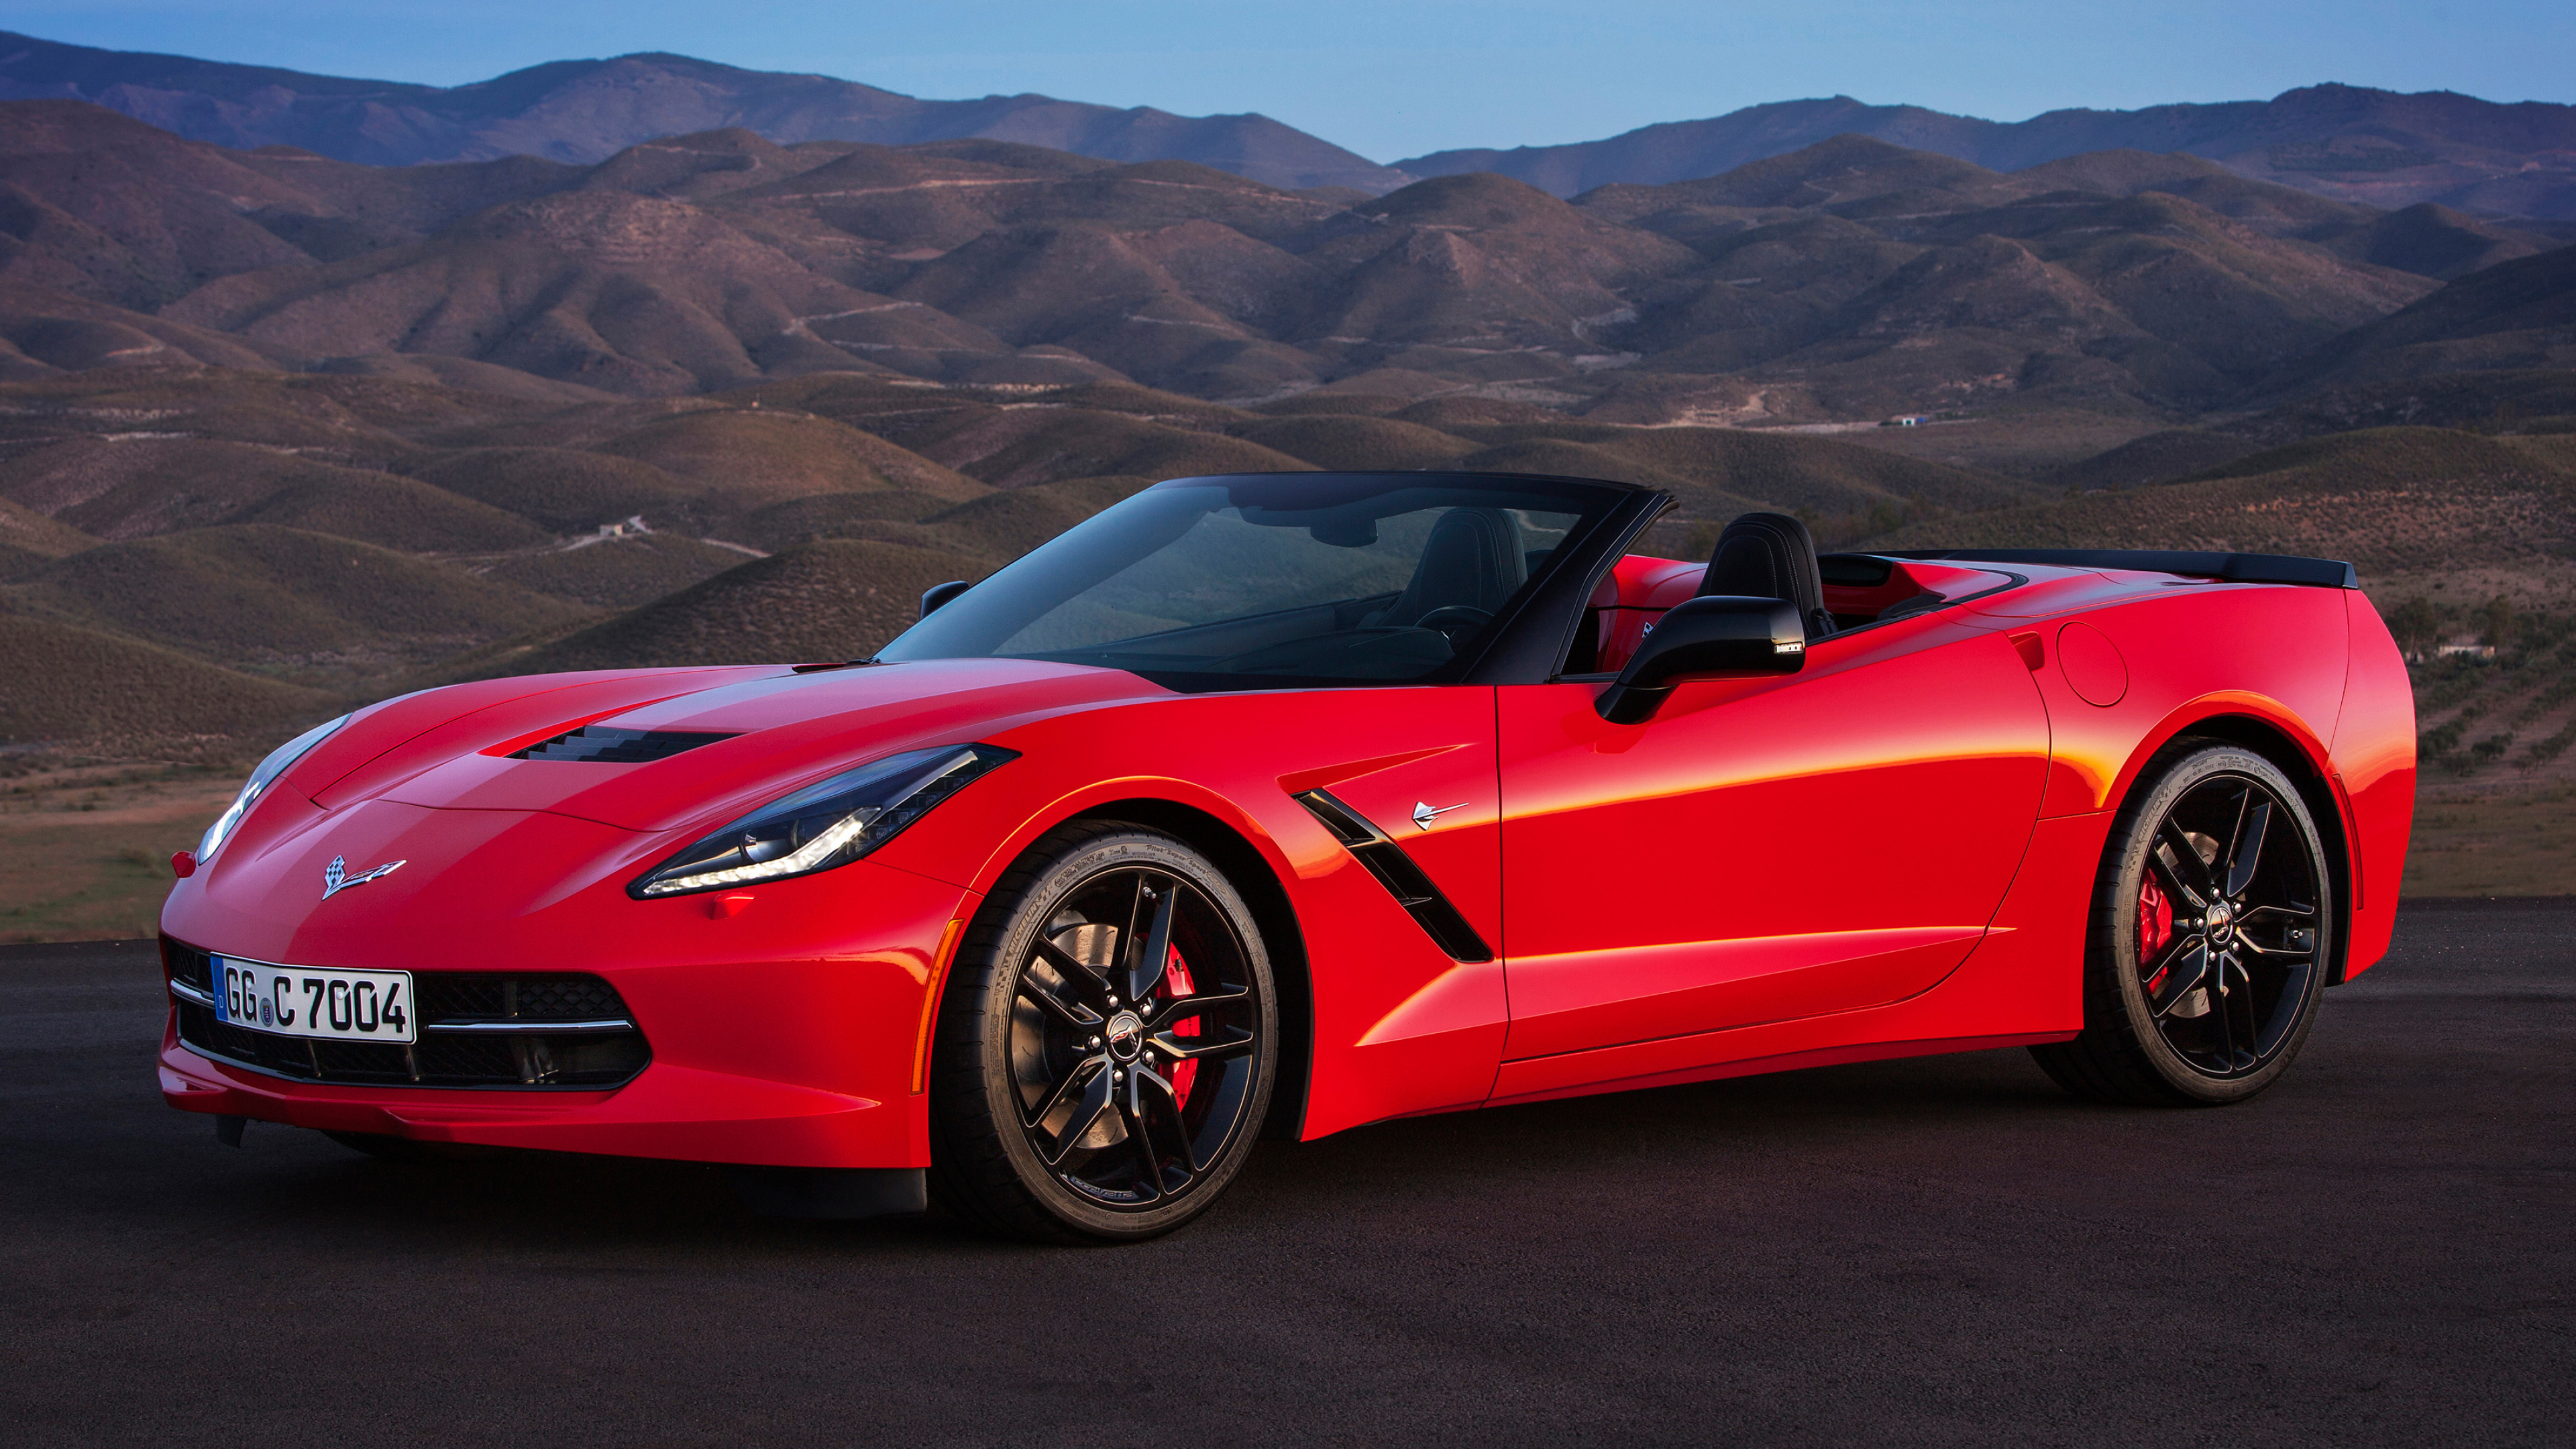 Corvette: The seventh generation convertible, ZR1, Engine with turbo-boost technology, High-speed driving. 3840x2160 4K Background.